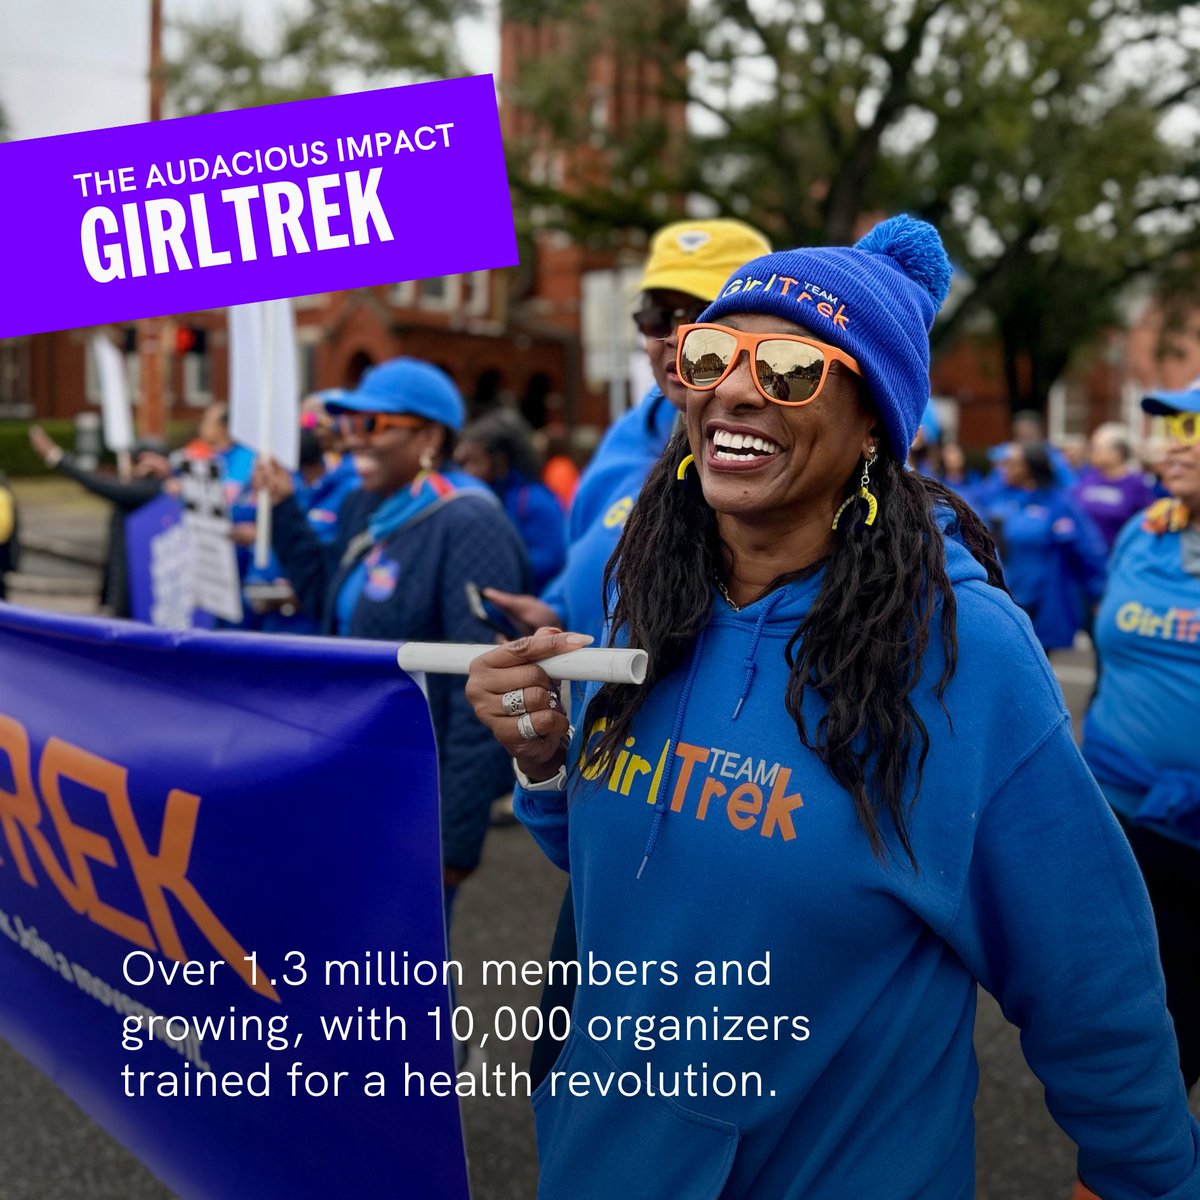 This week, join us to celebrate the six years since @GirlTrek announced their Audacious Project live on the TED stage.

#AudaciousProject